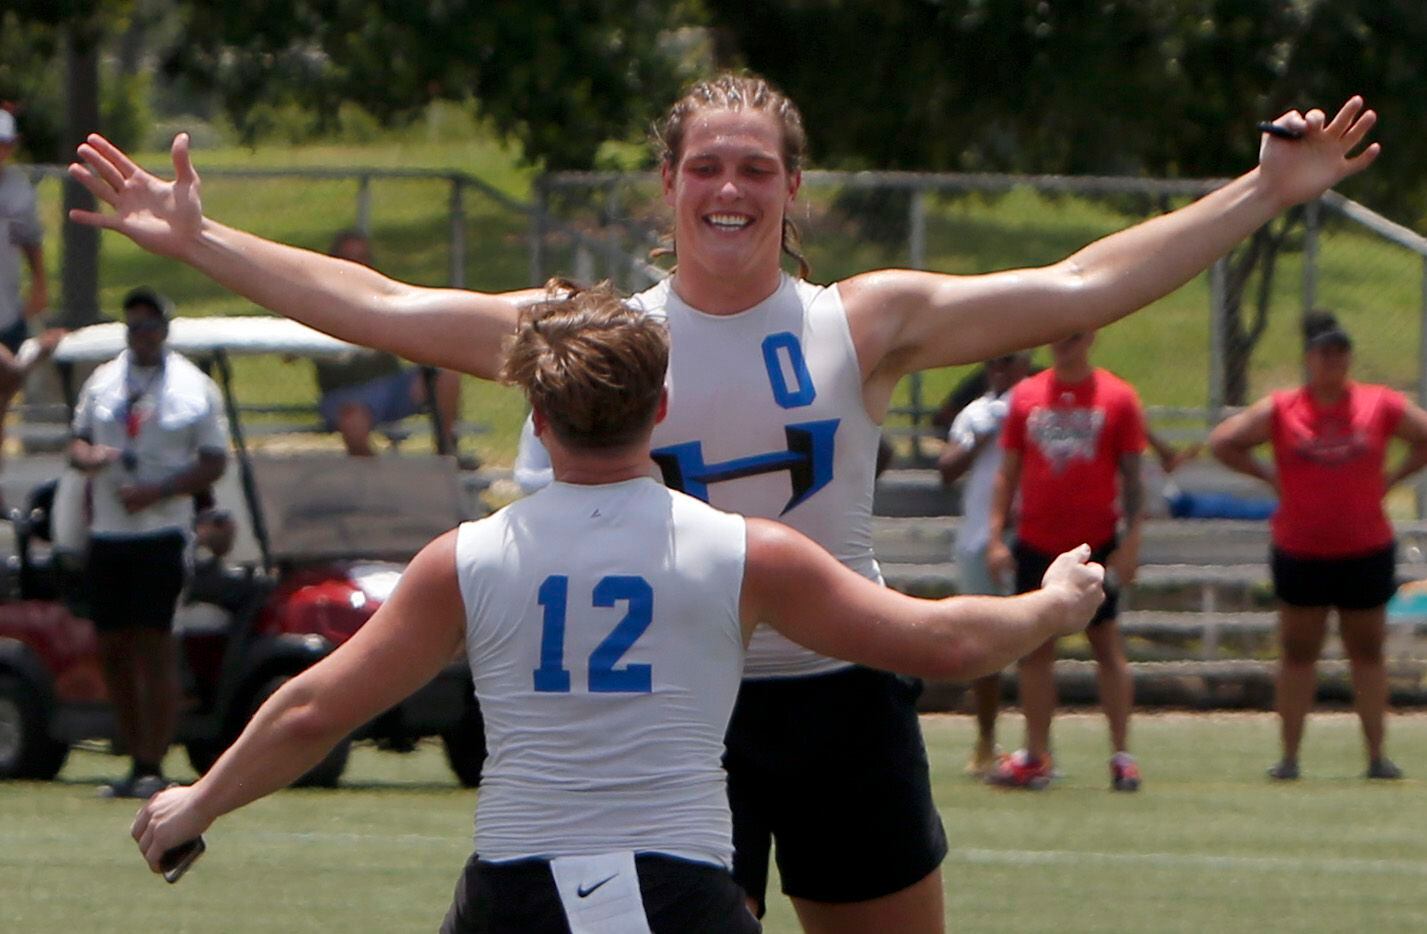 Hebron Hawks Carter Brock (0) and Chris Workley (12) celebrate after the team's 28-26 victory over Lake Travis in the championship game to claim the Division 1 title. The state 7 on 7 football tournament attracted athletes from schools throughout the state. The competition brackets for the final day of competition was held at Veterans Park in College Station on June 25, 2021. (Steve Hamm/ Special Contributor)